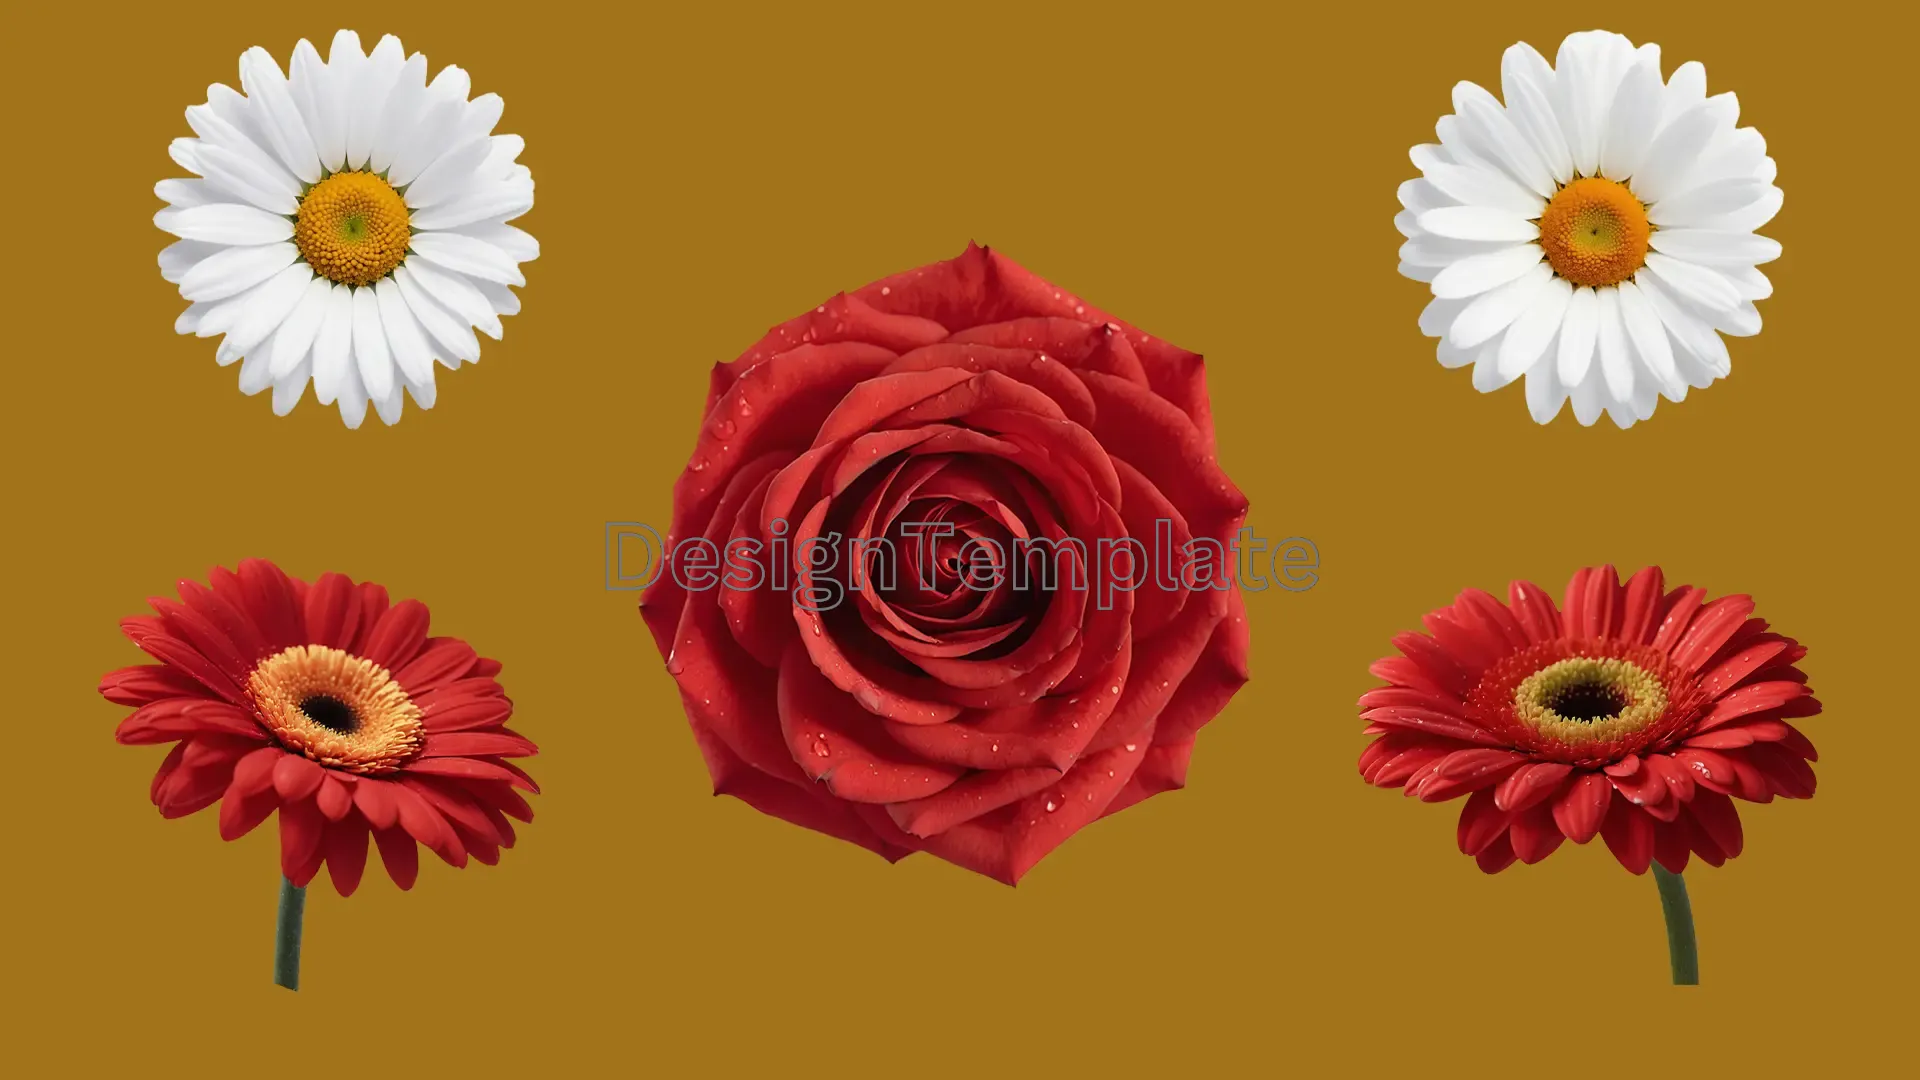 Collection of Beautiful Red and White Flowers 3D Design Elements